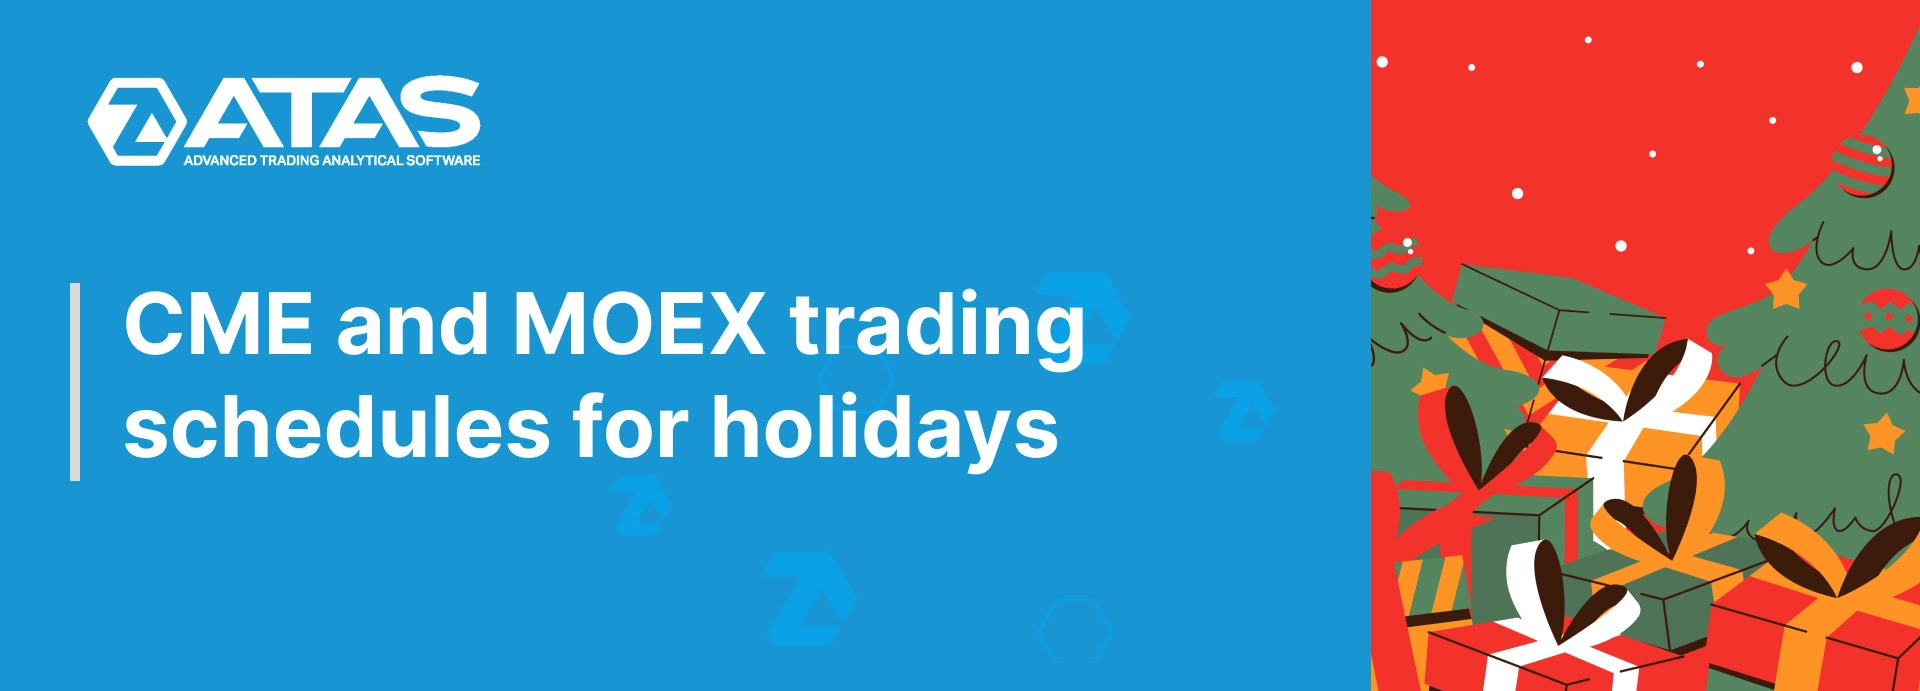 CME and MOEX trading schedules for holidays